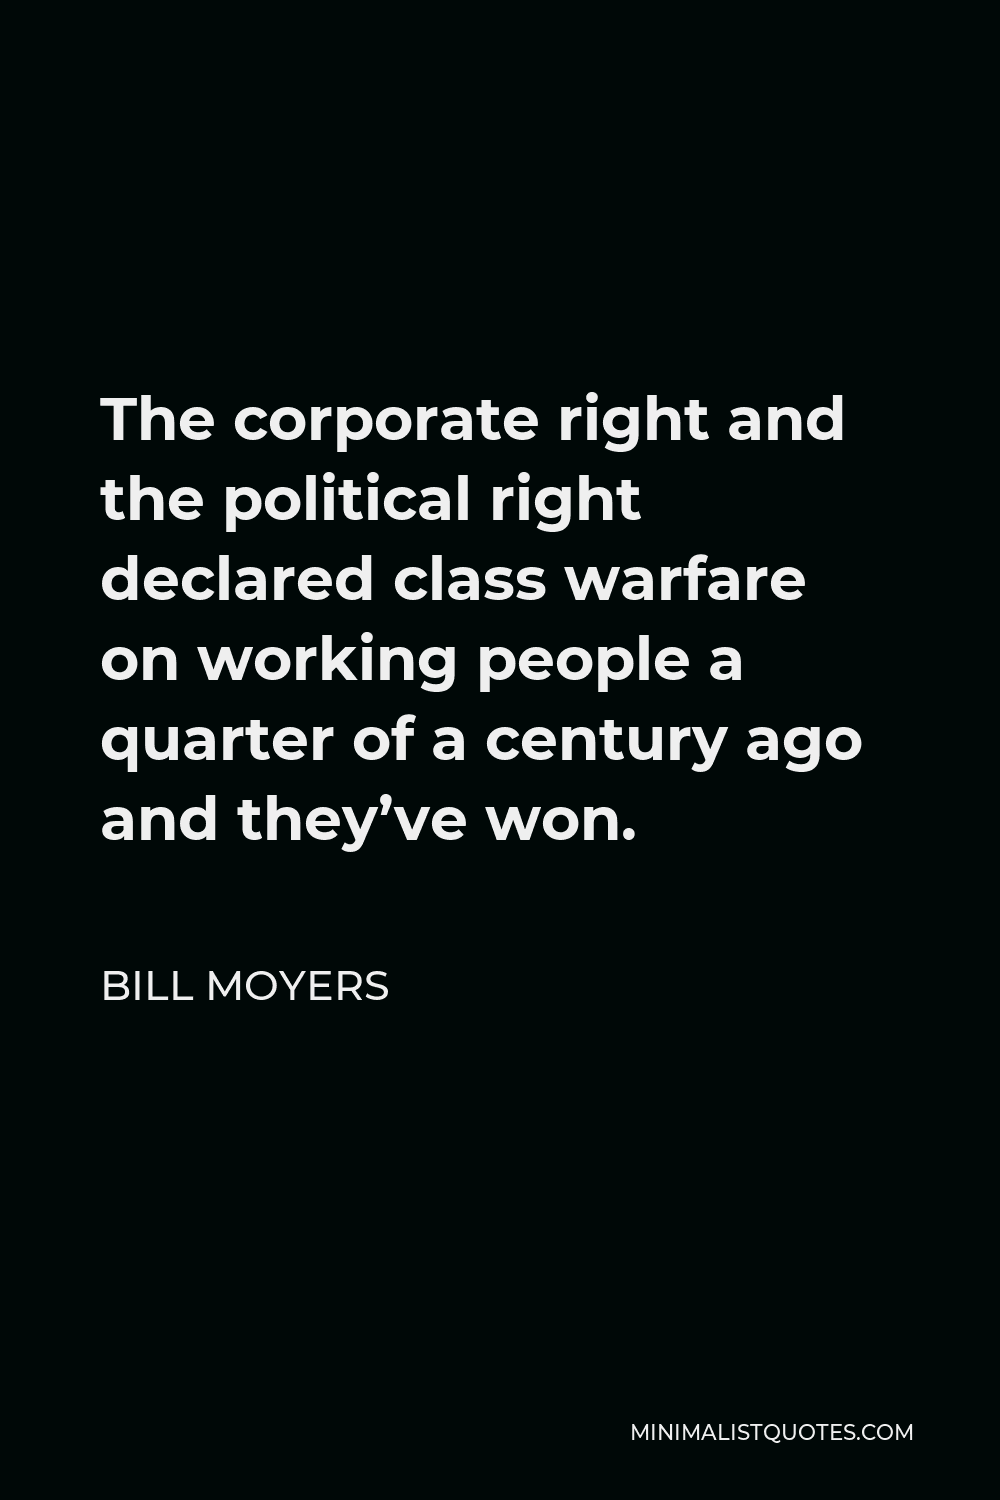 Bill Moyers Quote - The corporate right and the political right declared class warfare on working people a quarter of a century ago and they’ve won.